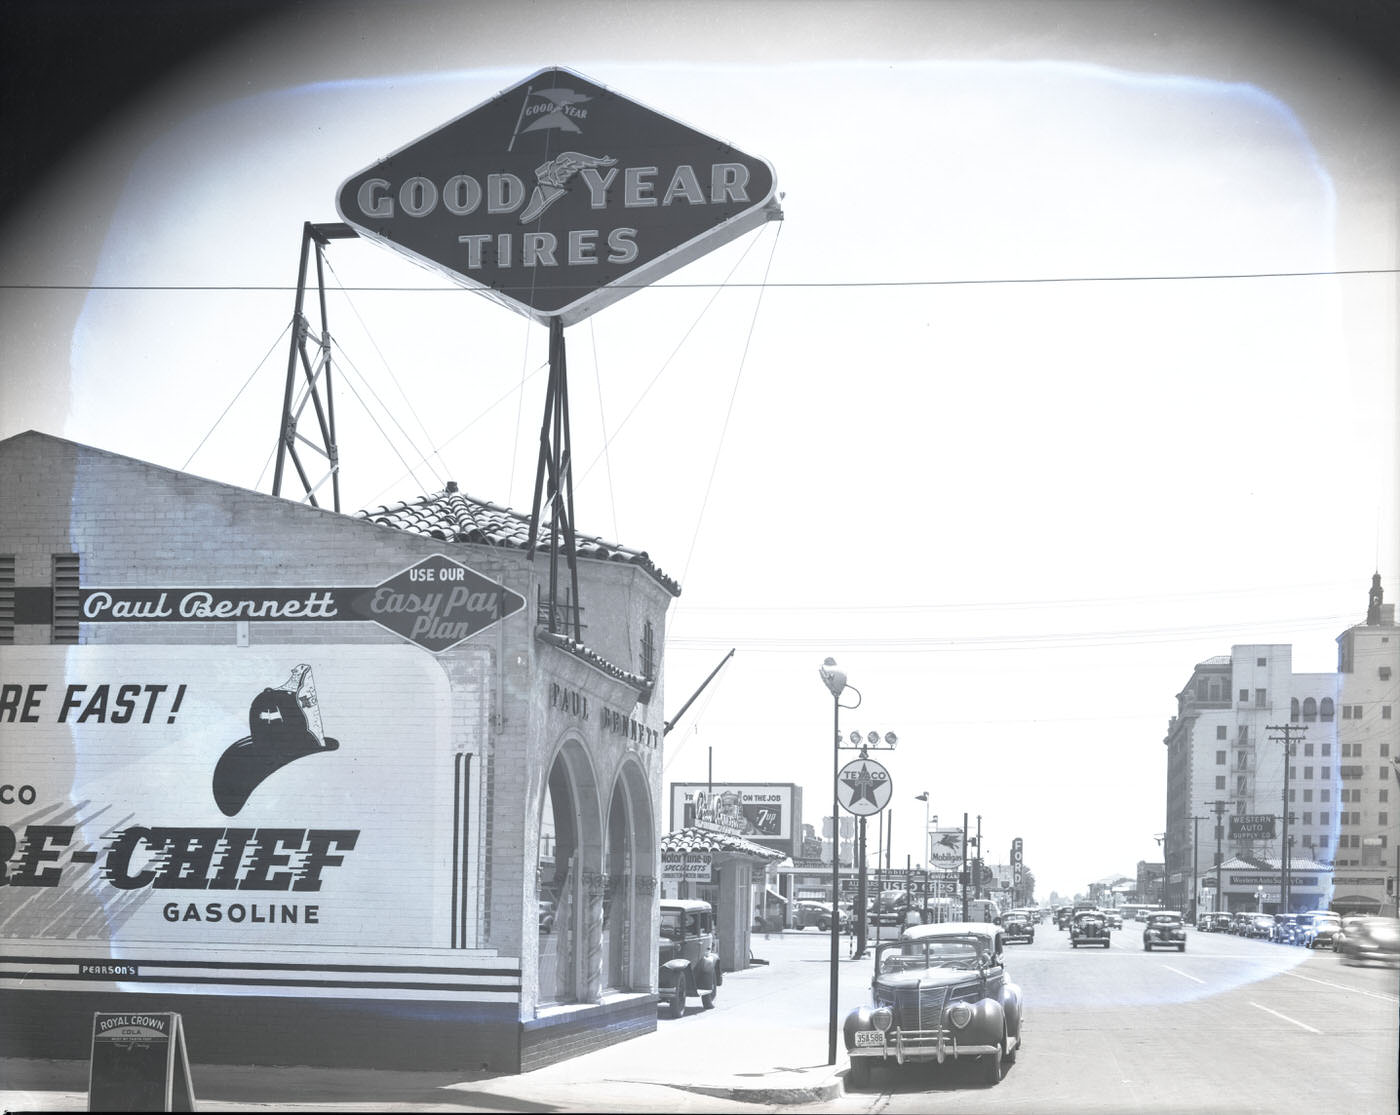 Goodyear Tire & Rubber Co. Store Exterior, 1930s